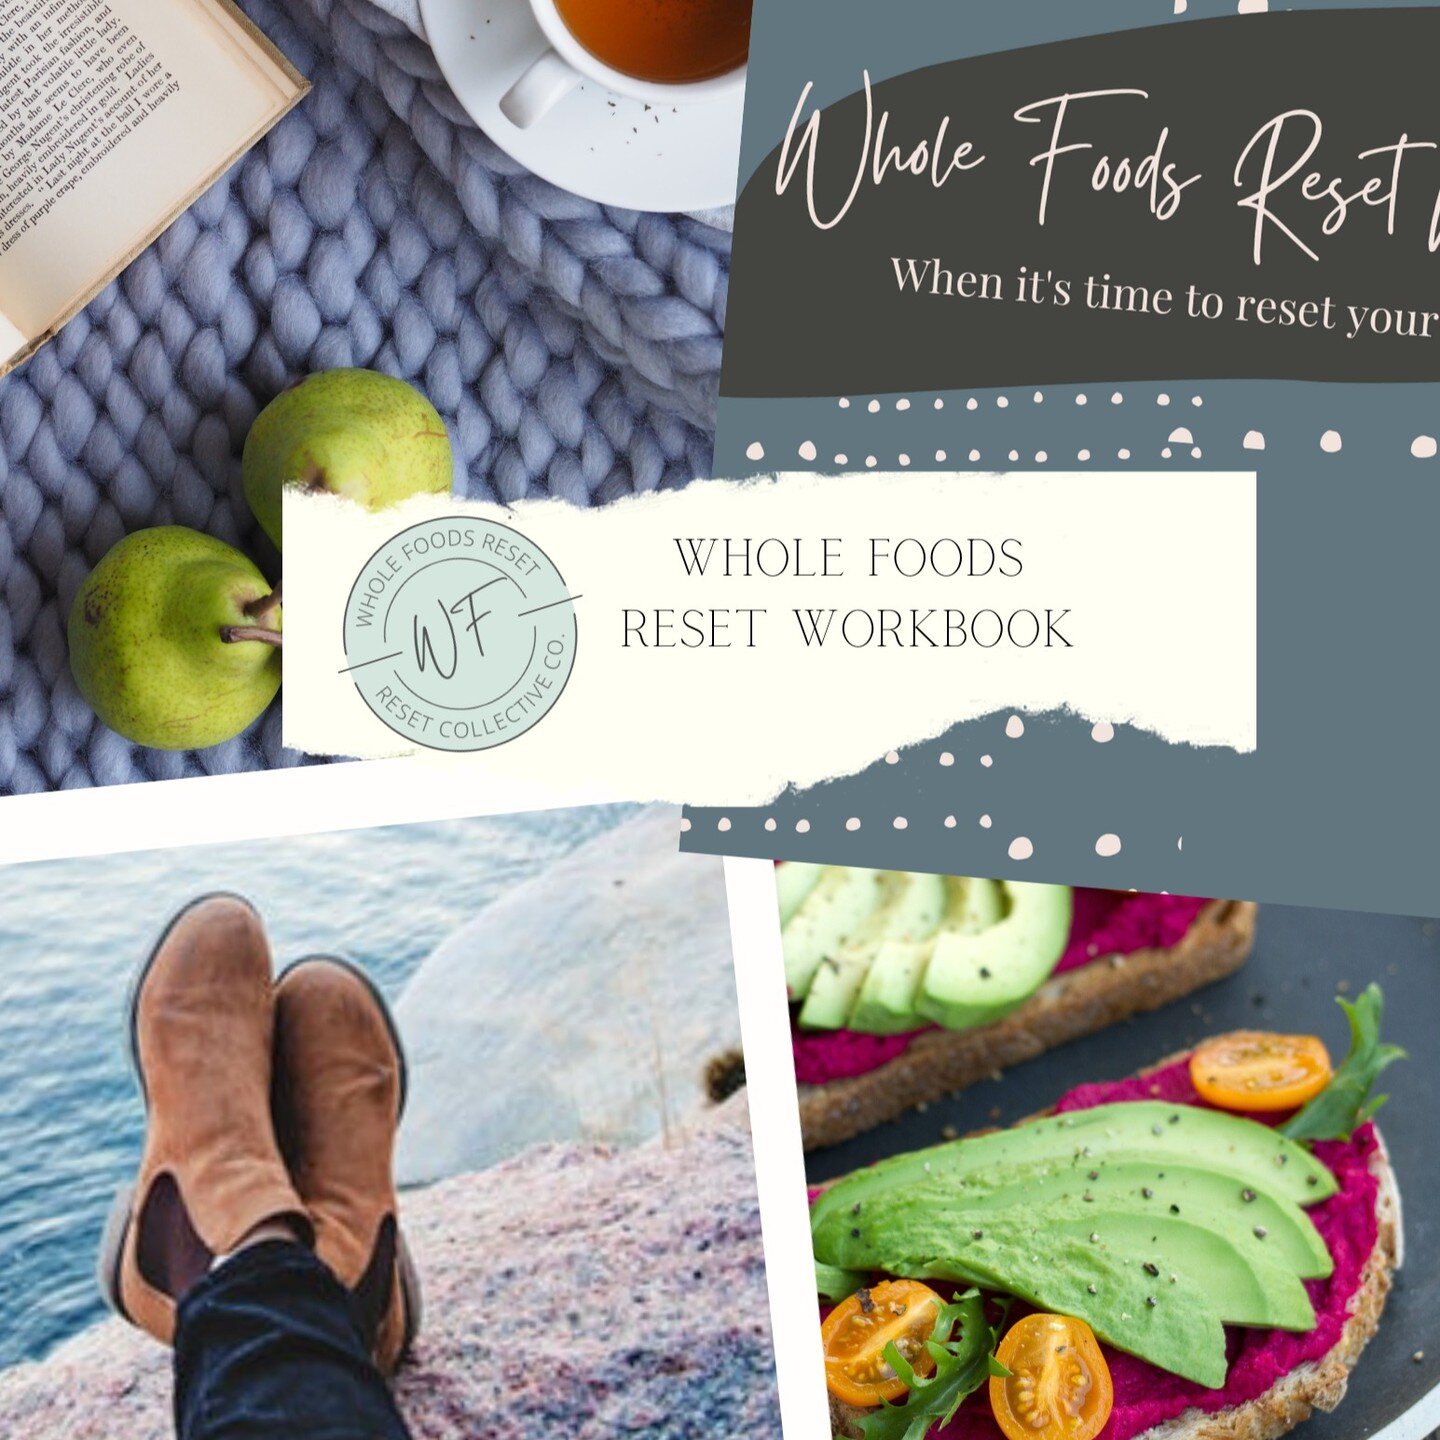 You can finally take that next step to prioritize your health and nourish your body! Introducing the WF workbook you can learn to apply the principals from our Whole Foods Reset with even greater success.

This toolkit will help you improve and reset